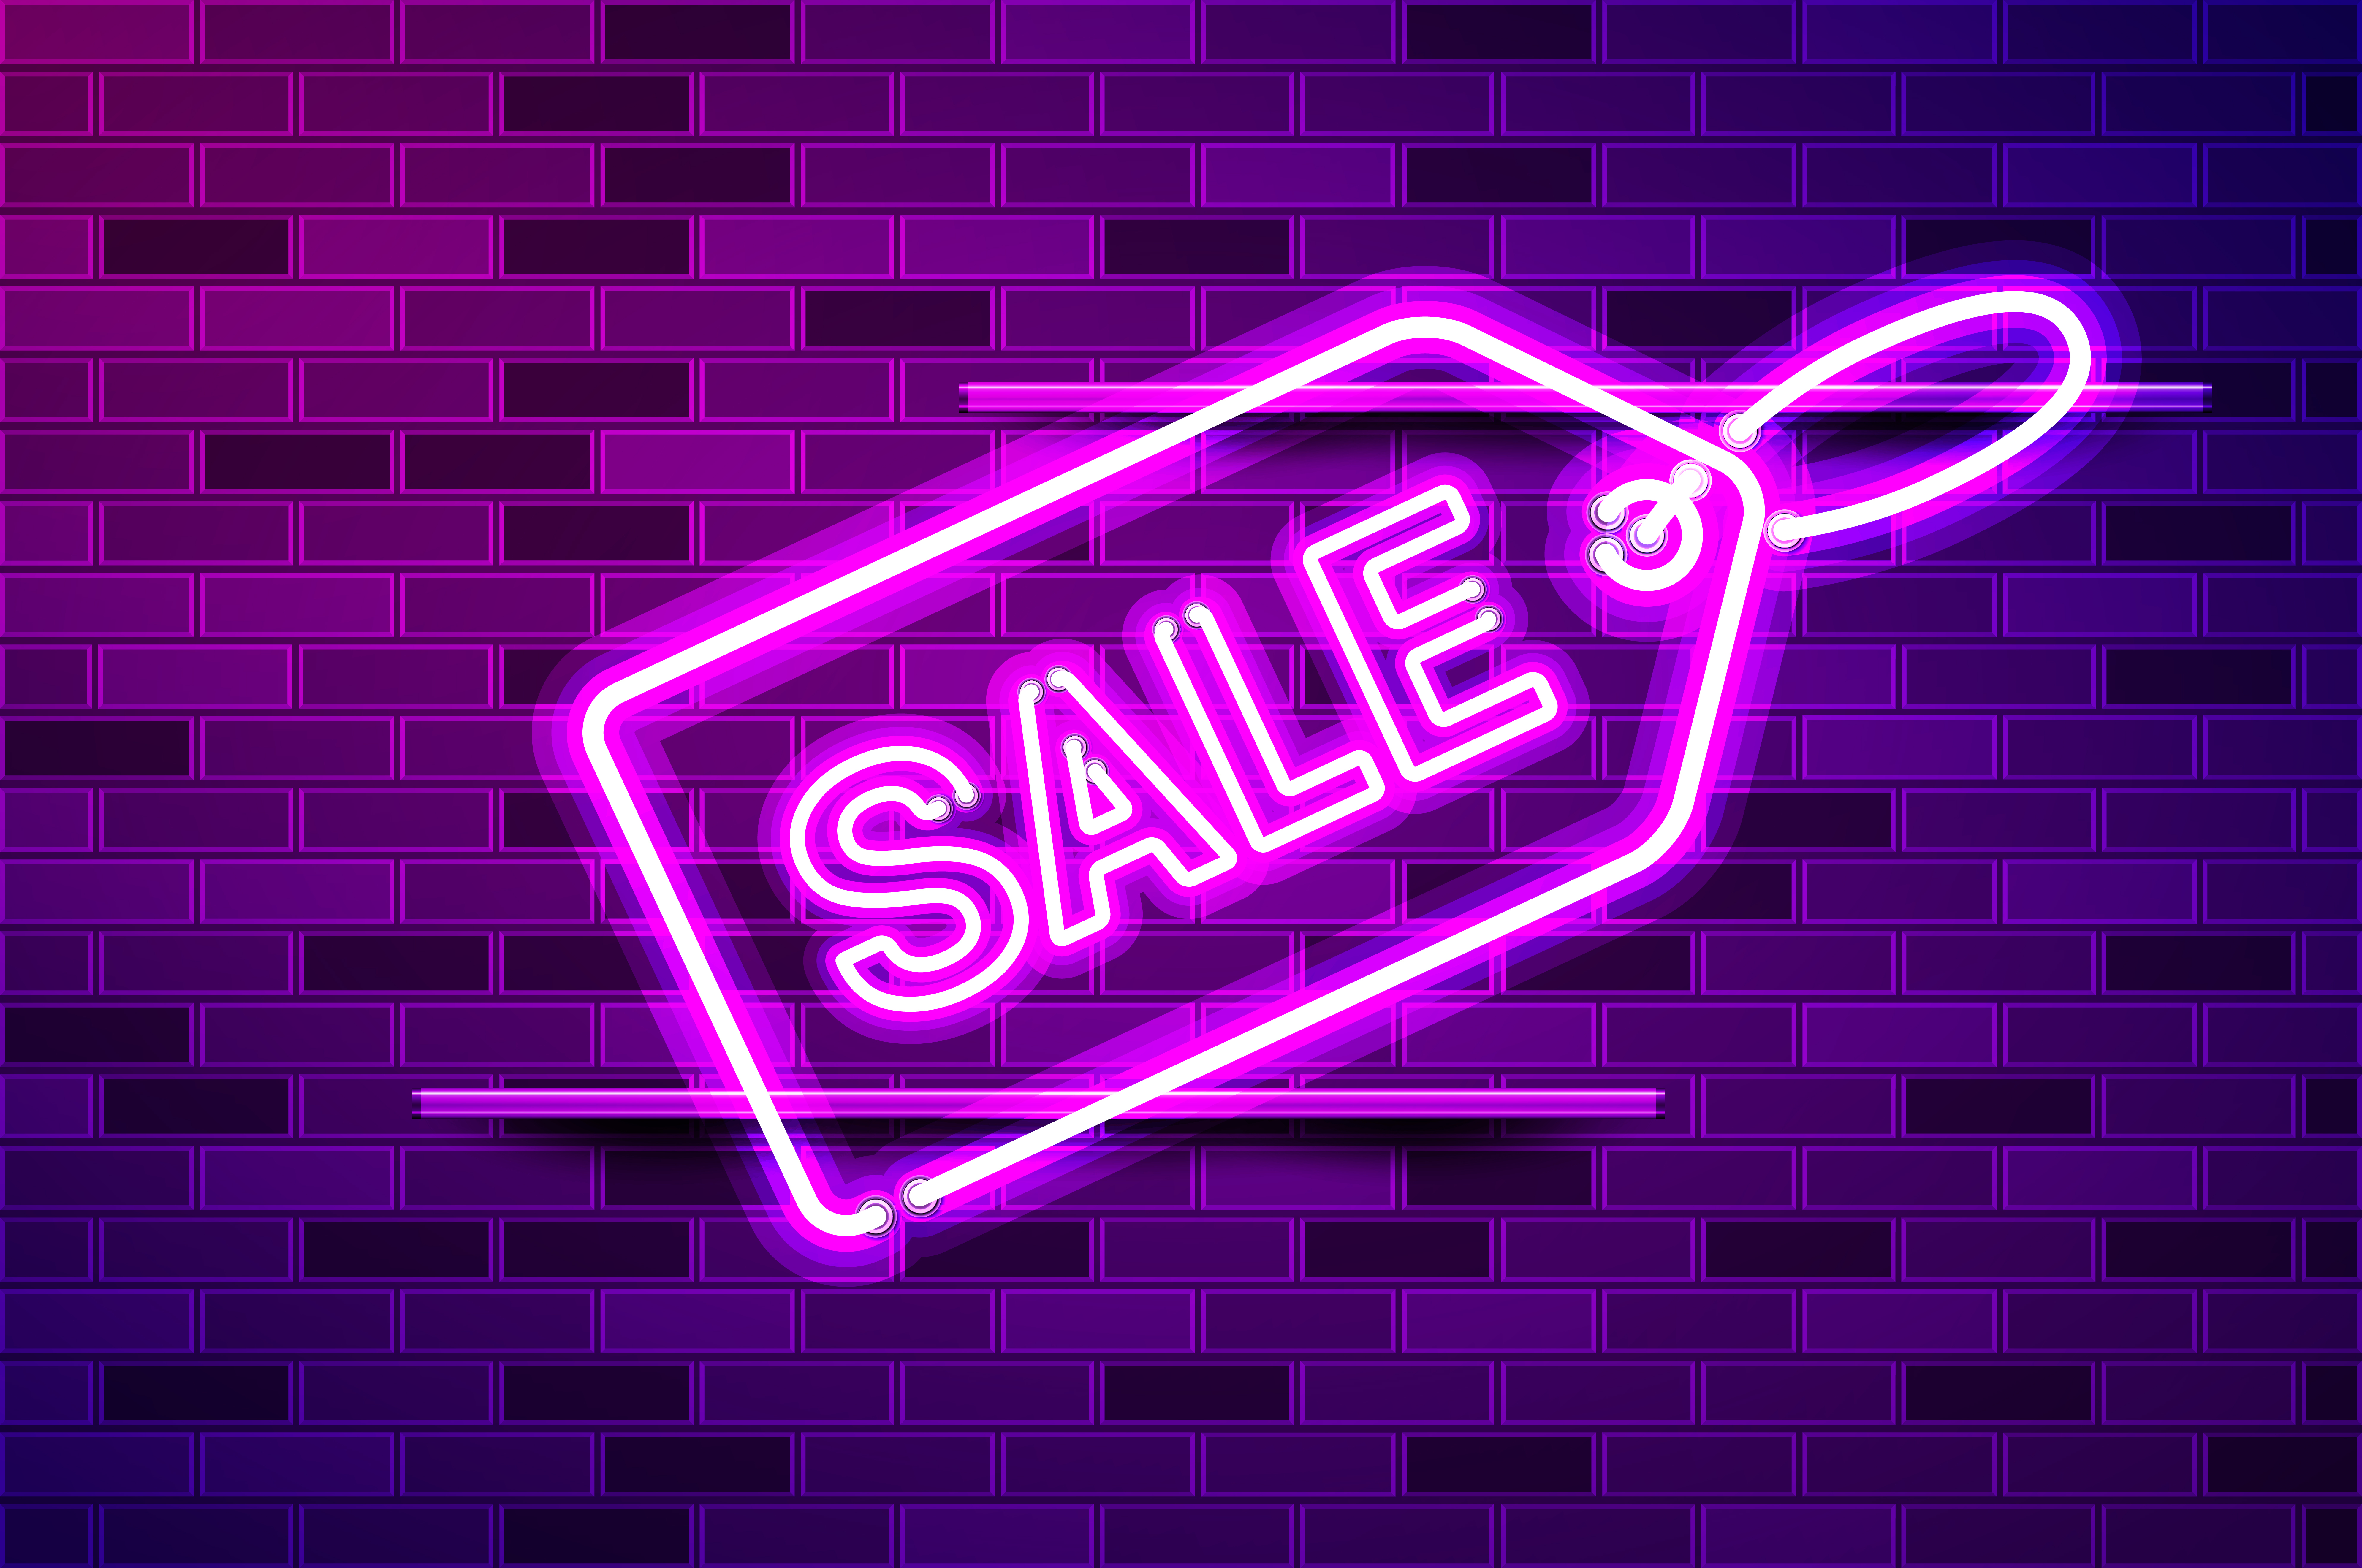 Sale tag glowing neon lamp sign. Realistic vector illustration. Purple brick wall, violet glow, metal holders.. Sale tag glowing purple neon lamp sign